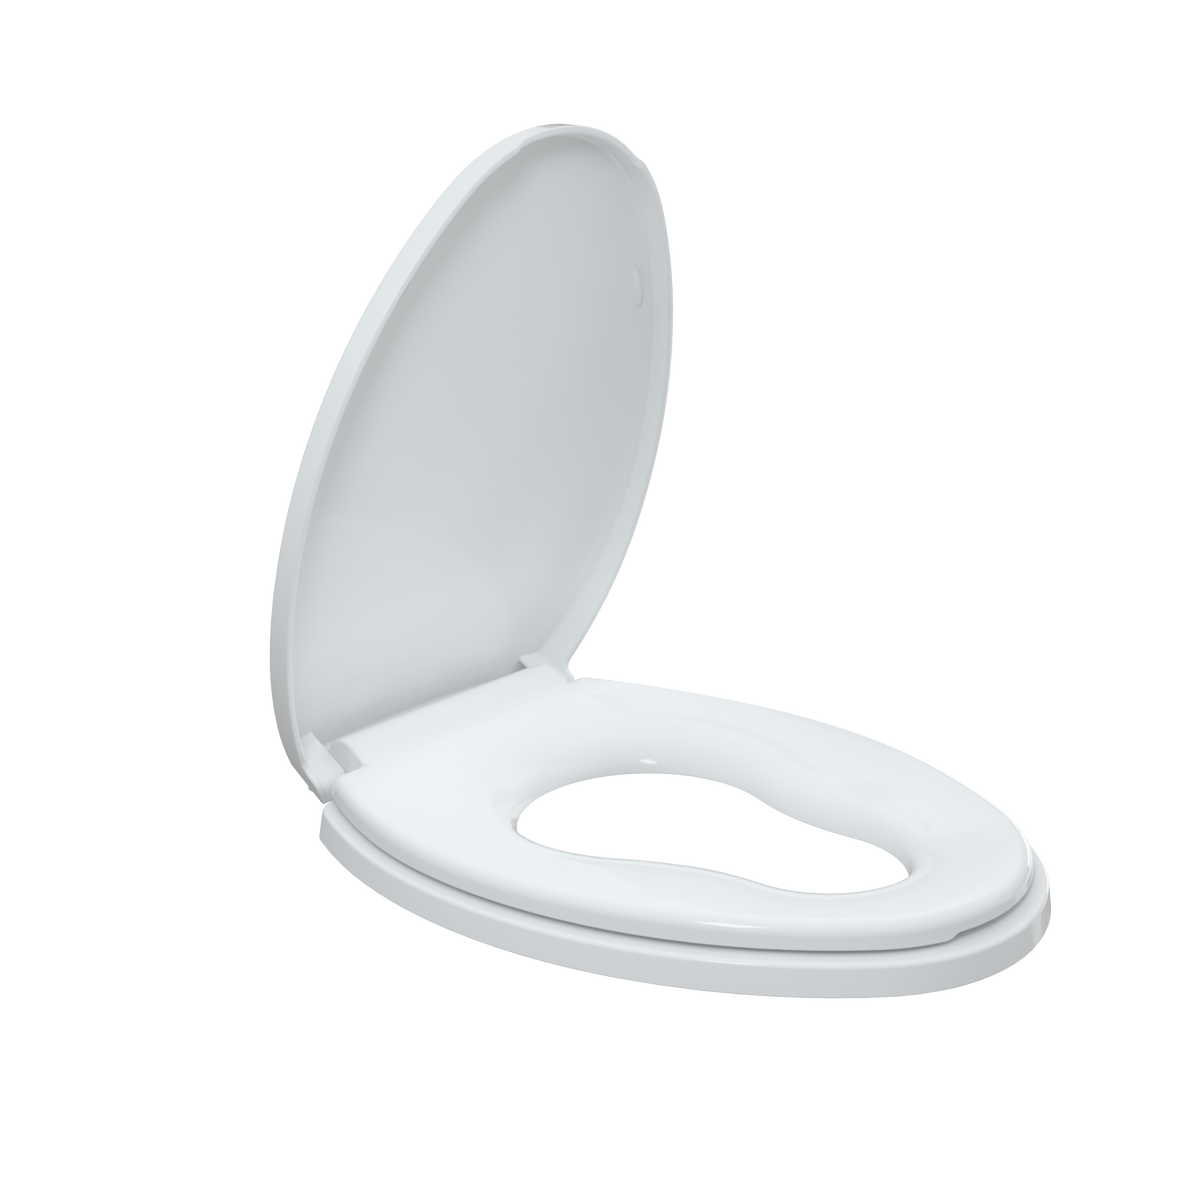 R&T B1045 Elongated Toilet Seat with Built in Child Seat